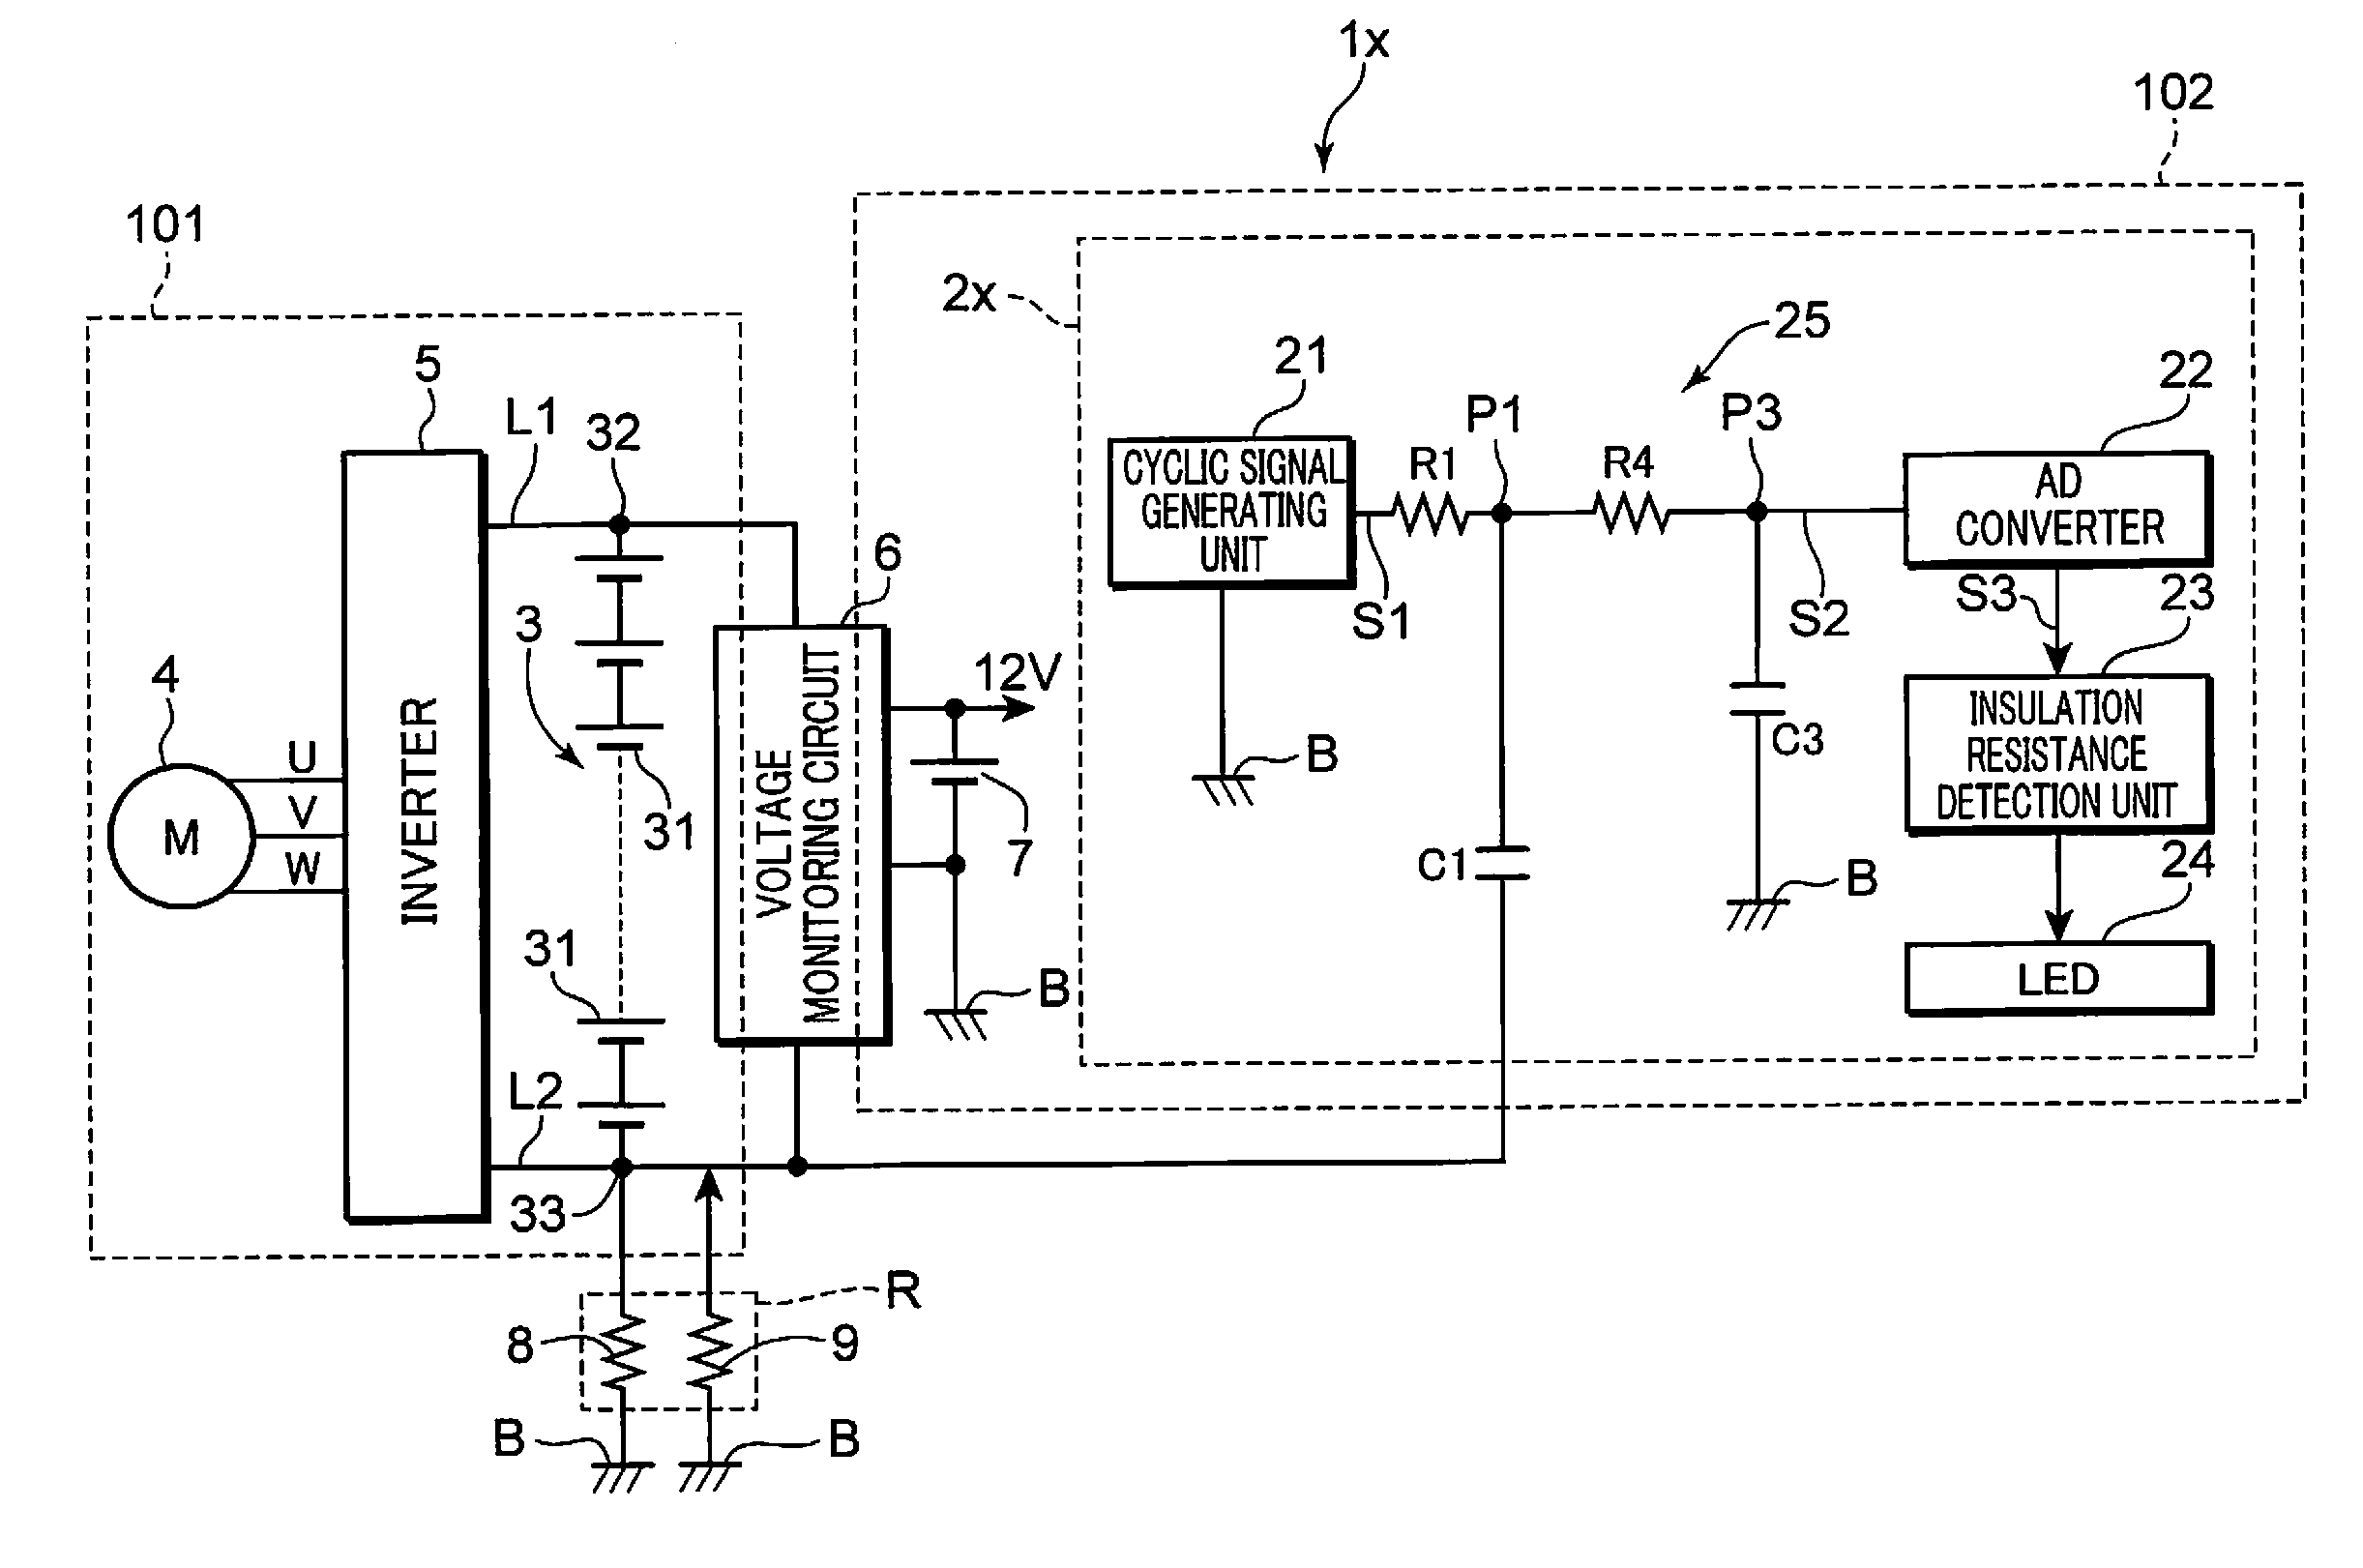 Vehicular insulation resistance detection apparatus